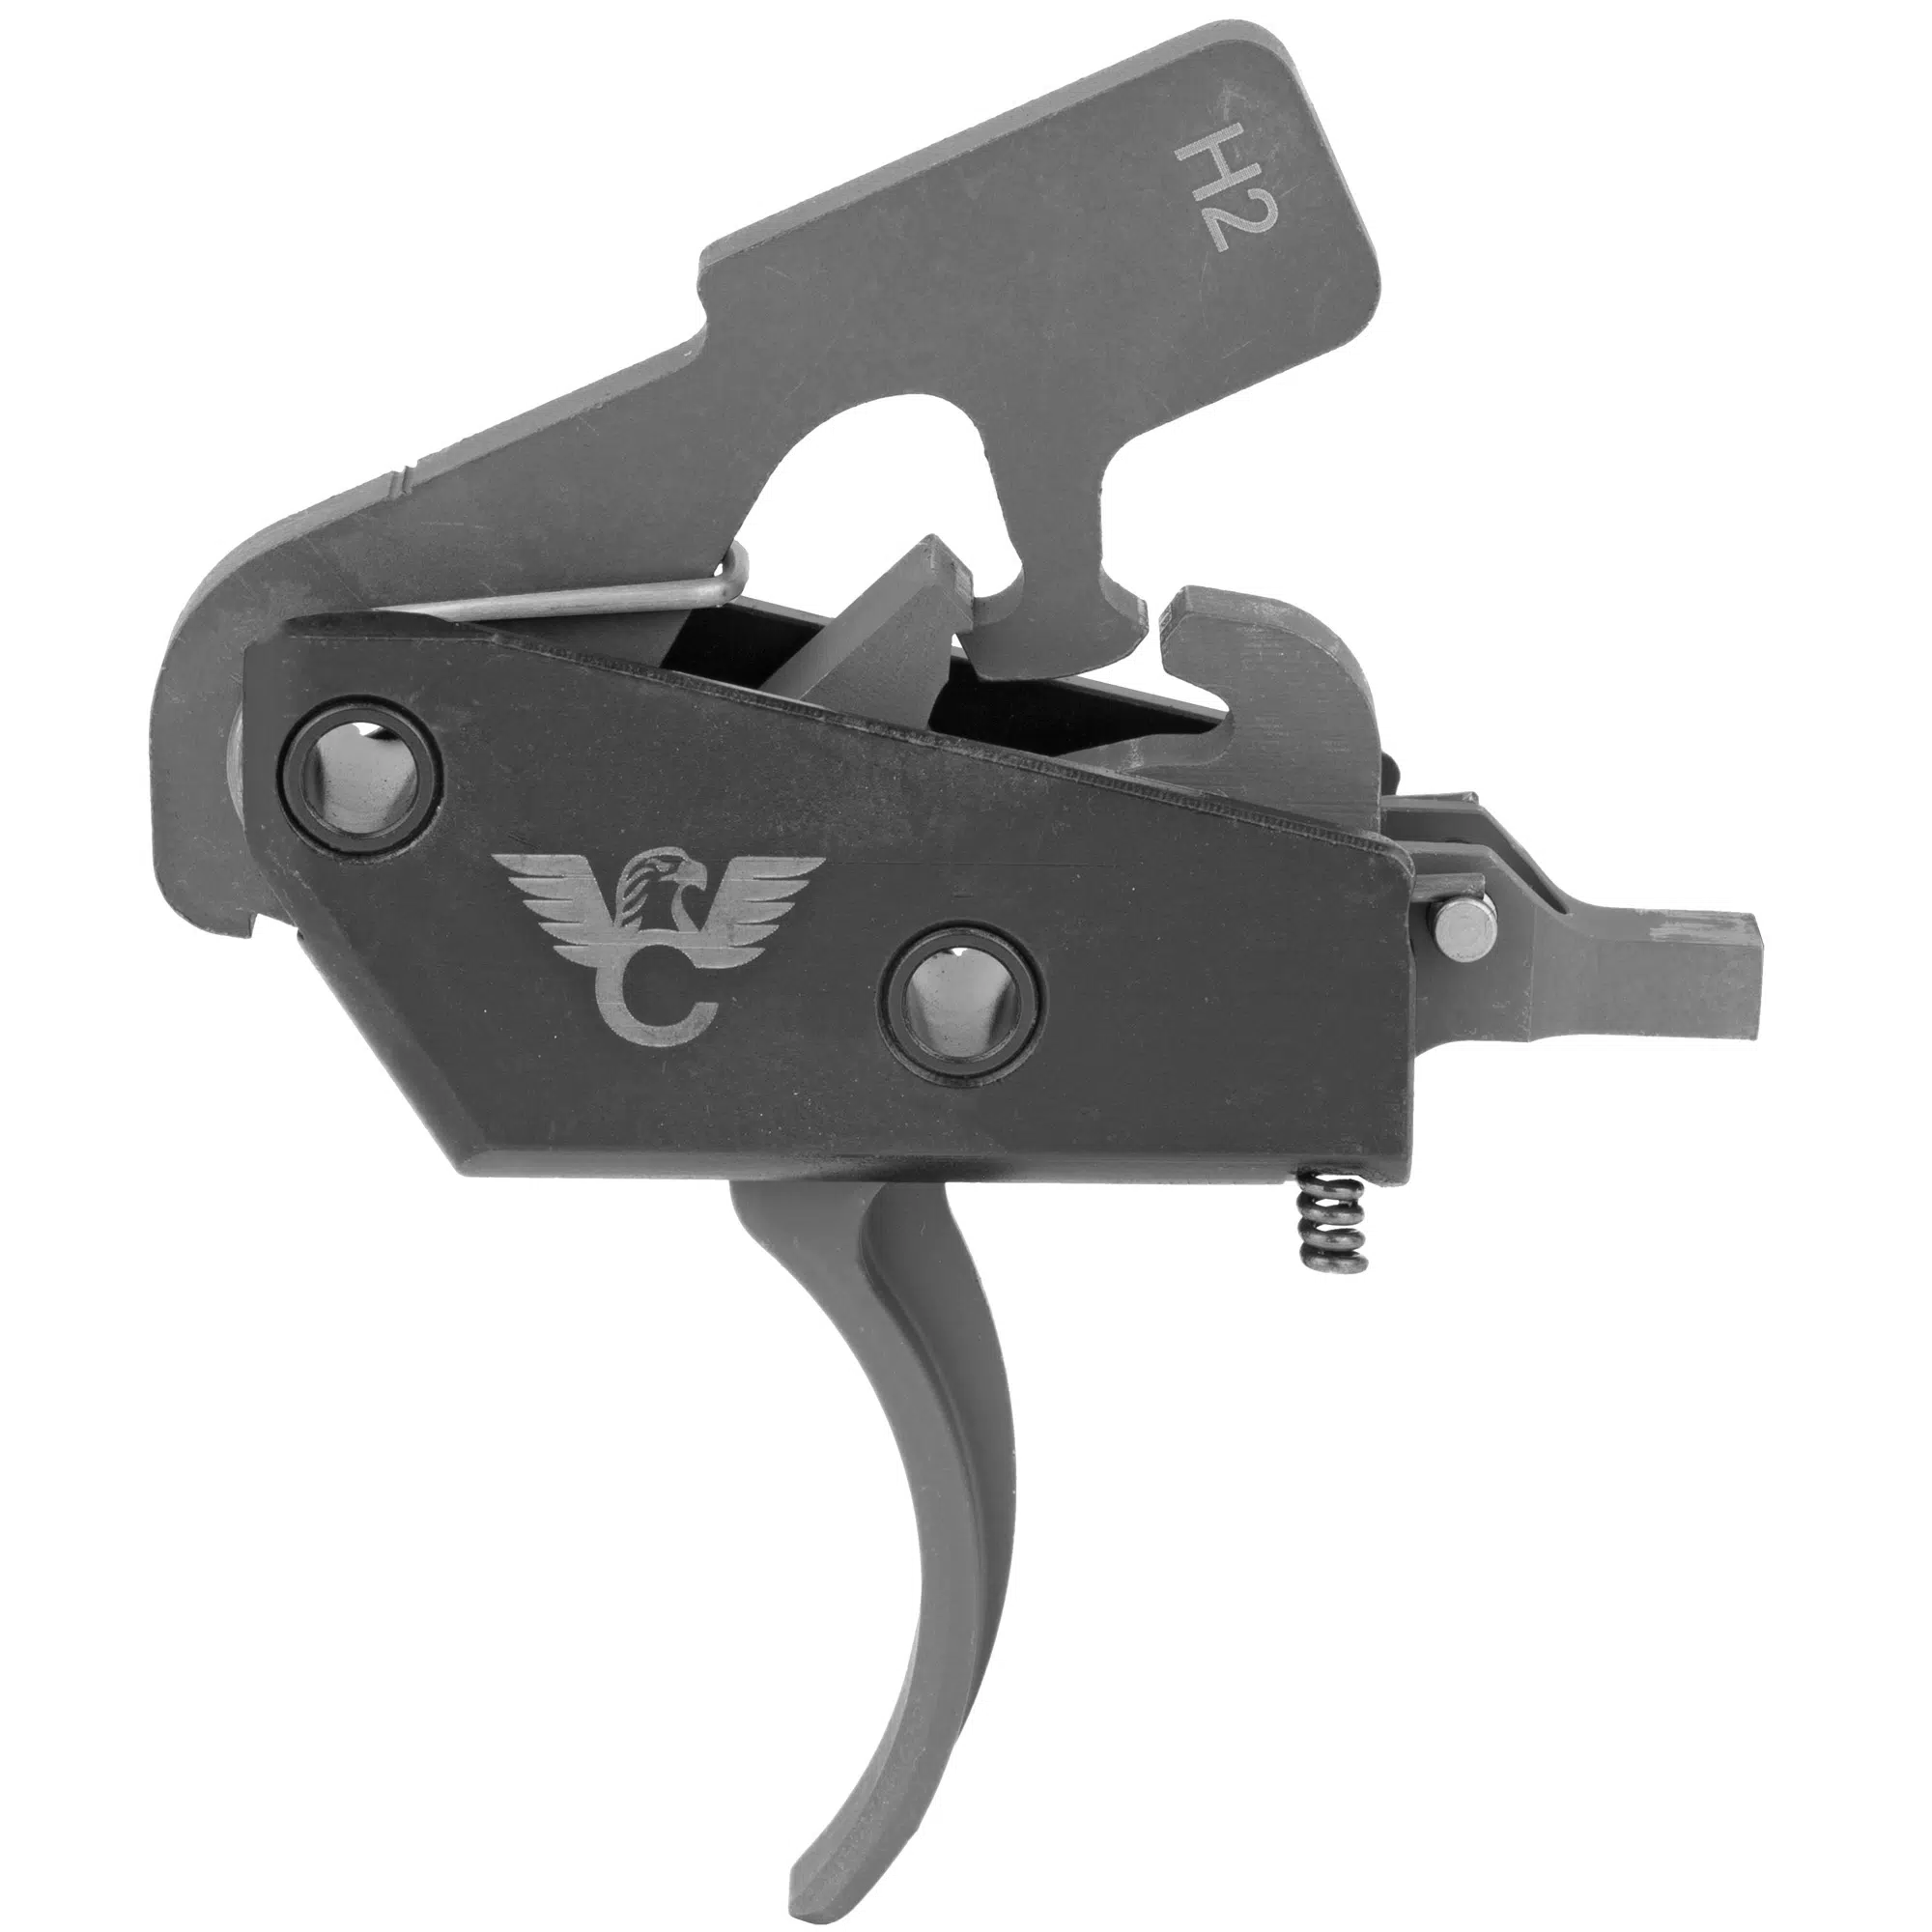 Wilson Combat TTU Tactical Trigger Unit for AR-15 - H2 Two Stage - 4.5-5 LB Pull Weight